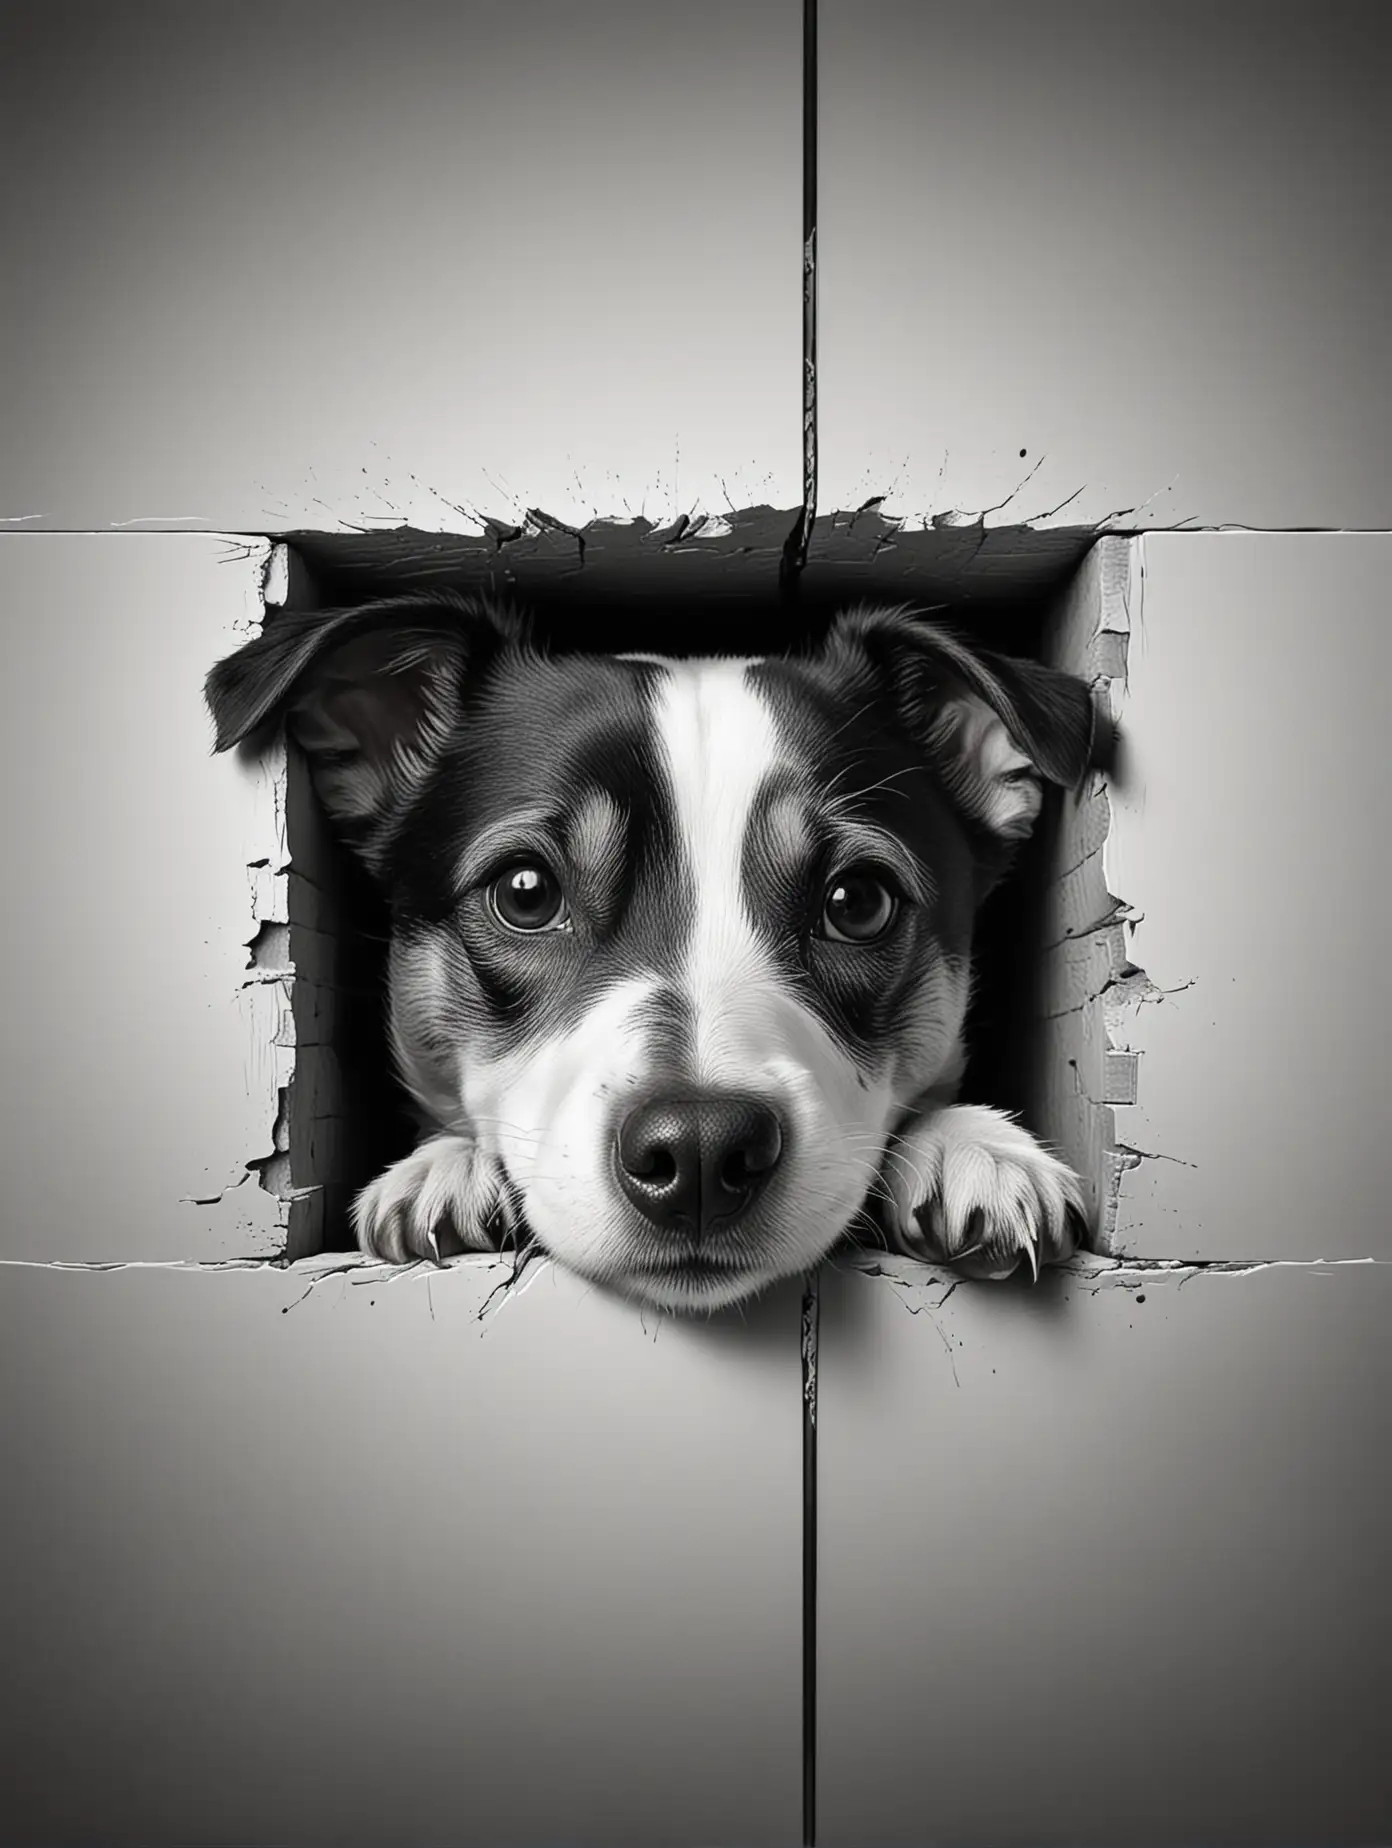 a black and white illustration of a Jack Russell Terrier 
 dog’s head and front paws resting over a horizontal line, giving the impression that the dog is peeking over a surface. The stylized artwork features bold lines and contrasting areas of black and white, creating an interesting visual effect. The dog appears to be a breed with pointed ears.